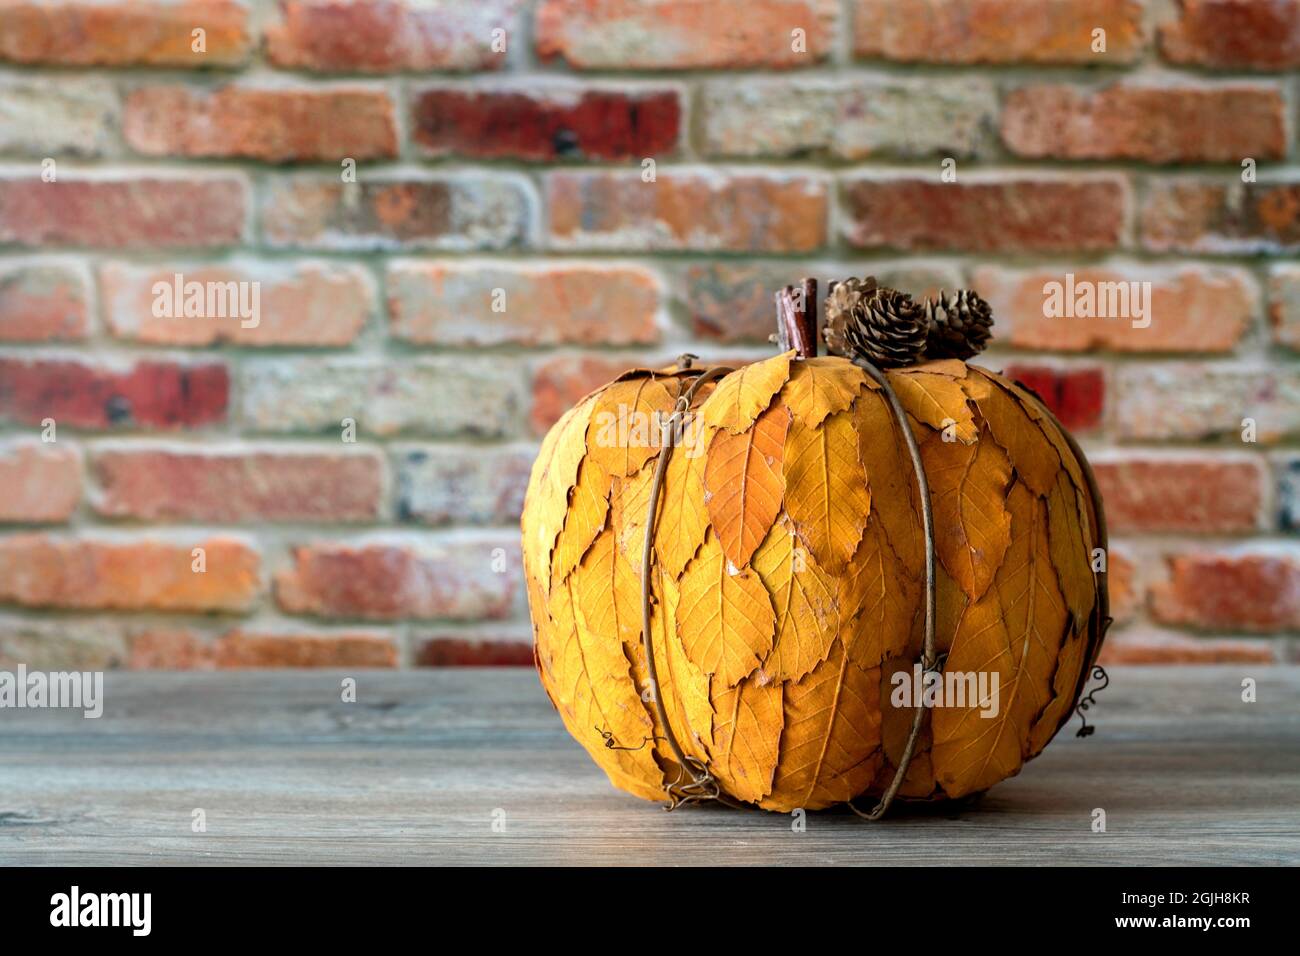 Decorative pumpkin made of yellow leafs isolated against red brick wall background. Thanksgiving concept Stock Photo